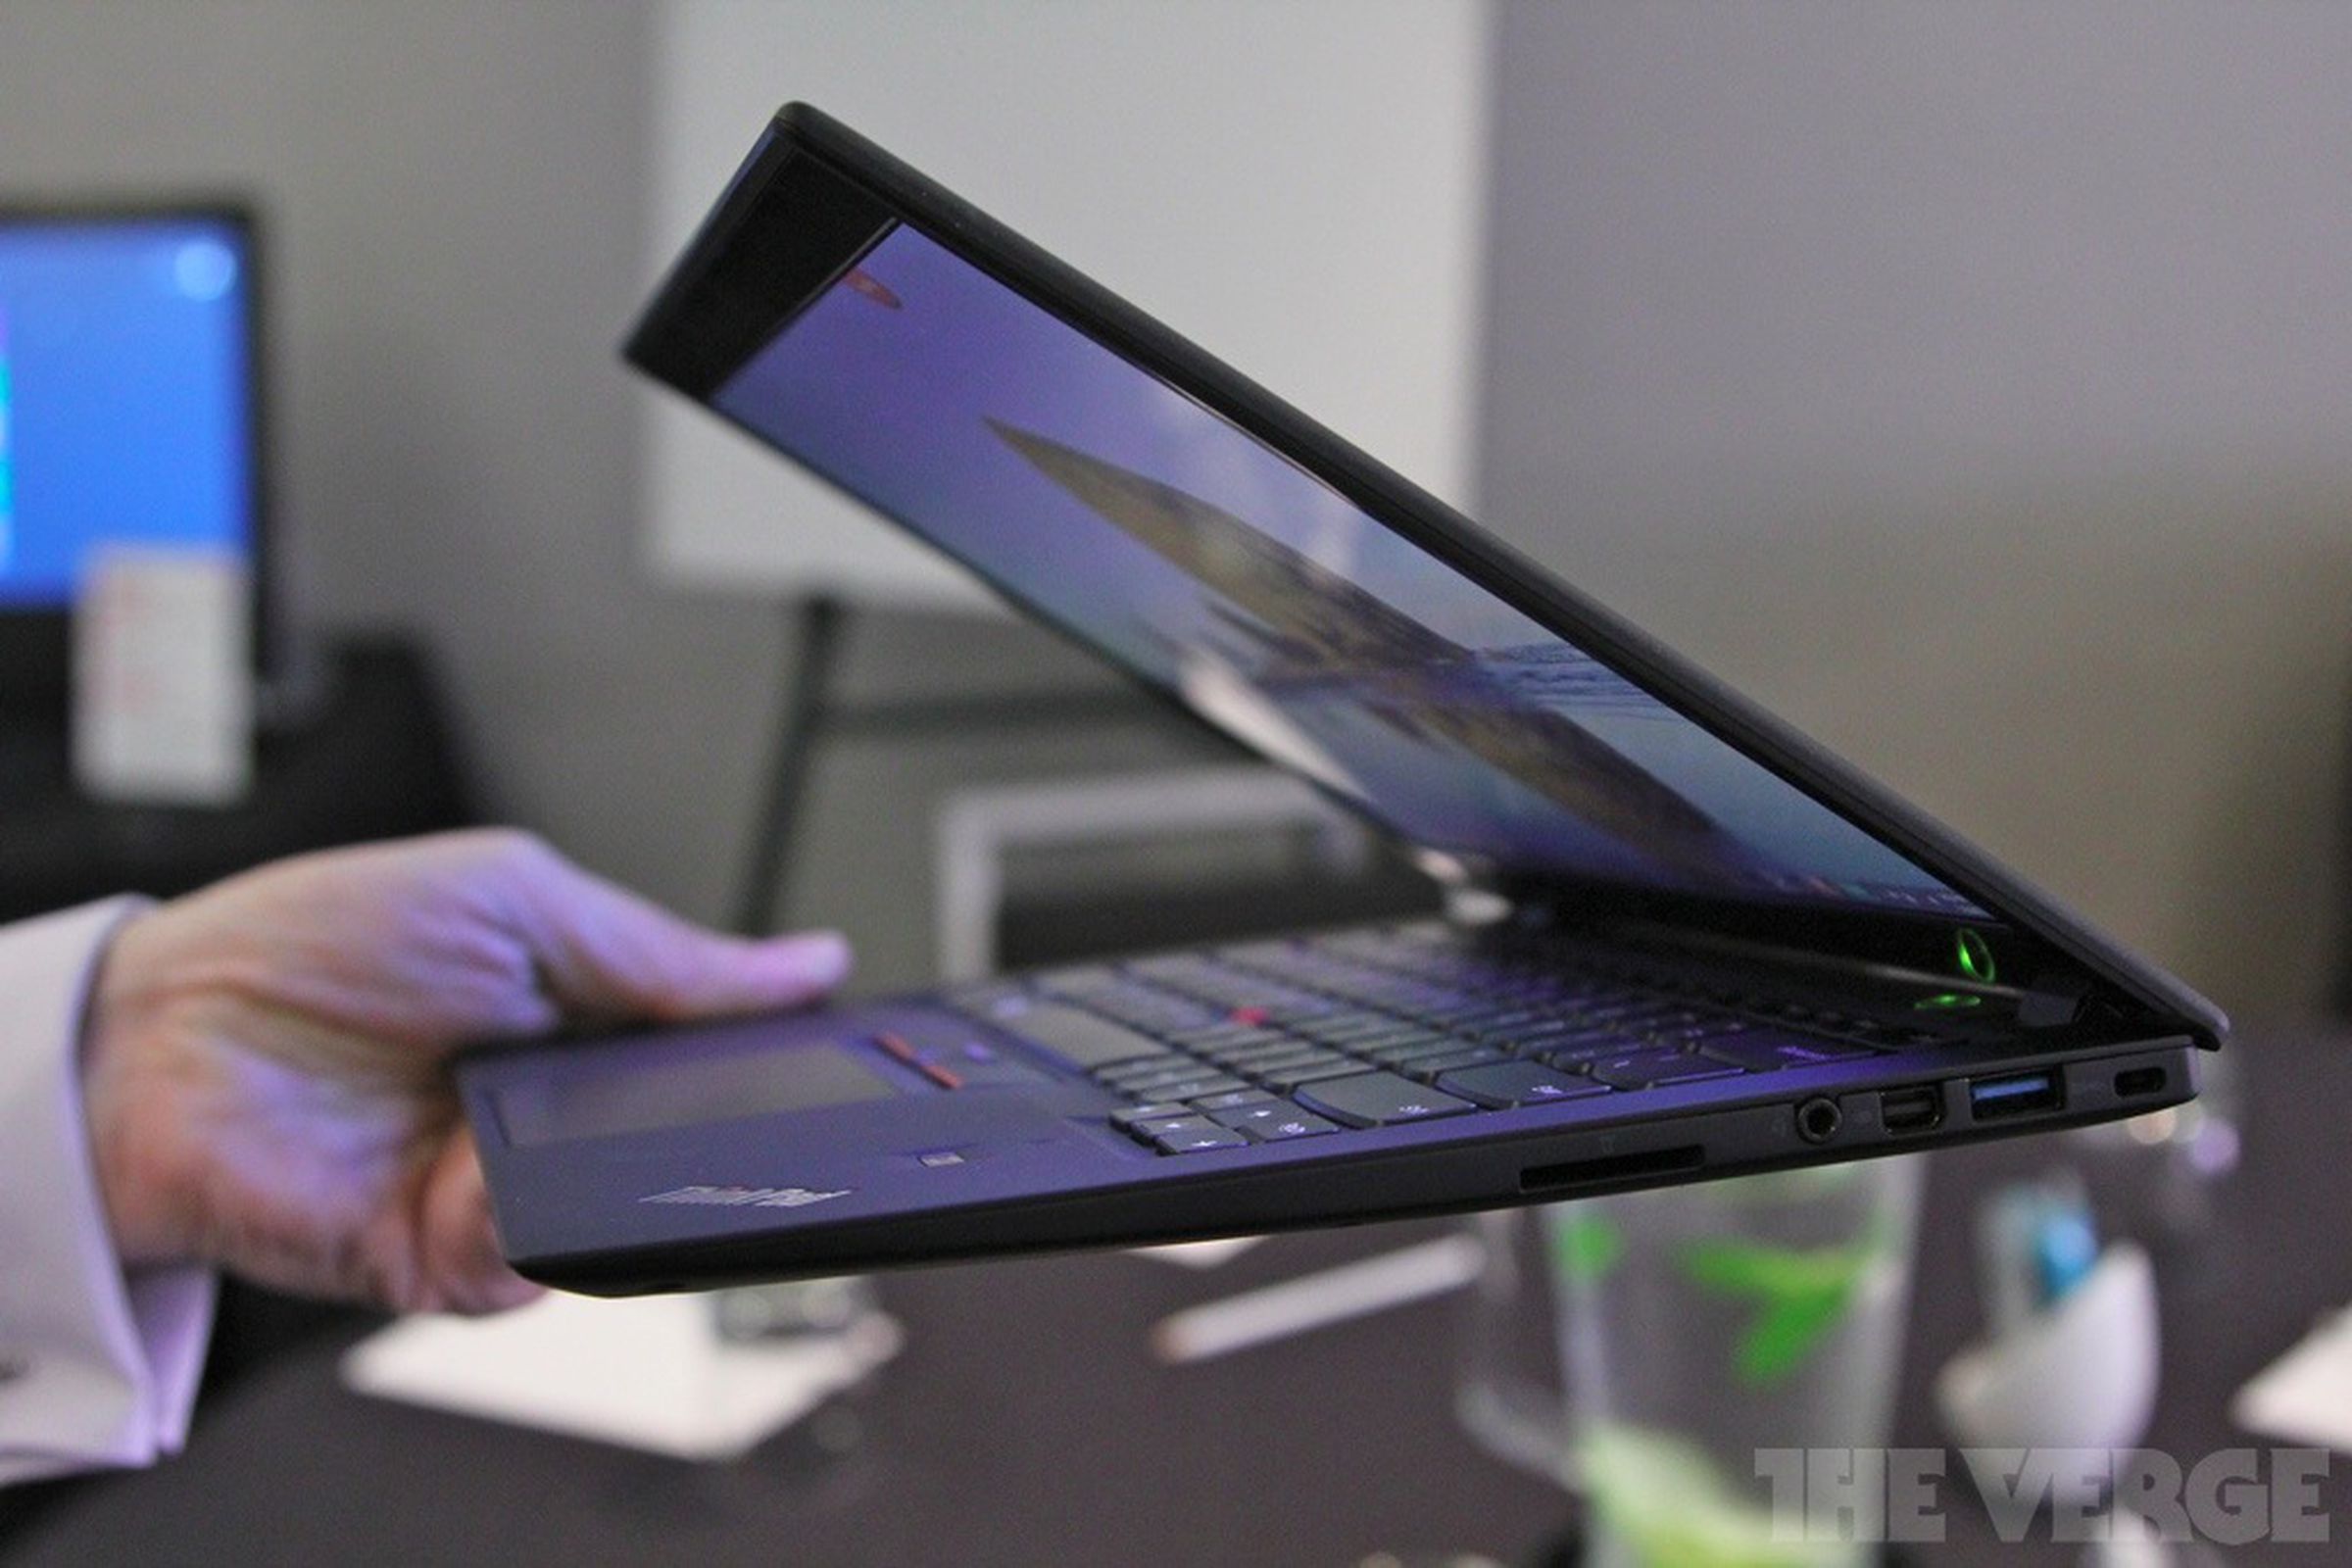 Gallery Photo: Lenovo ThinkPad X1 Carbon hands-on pictures